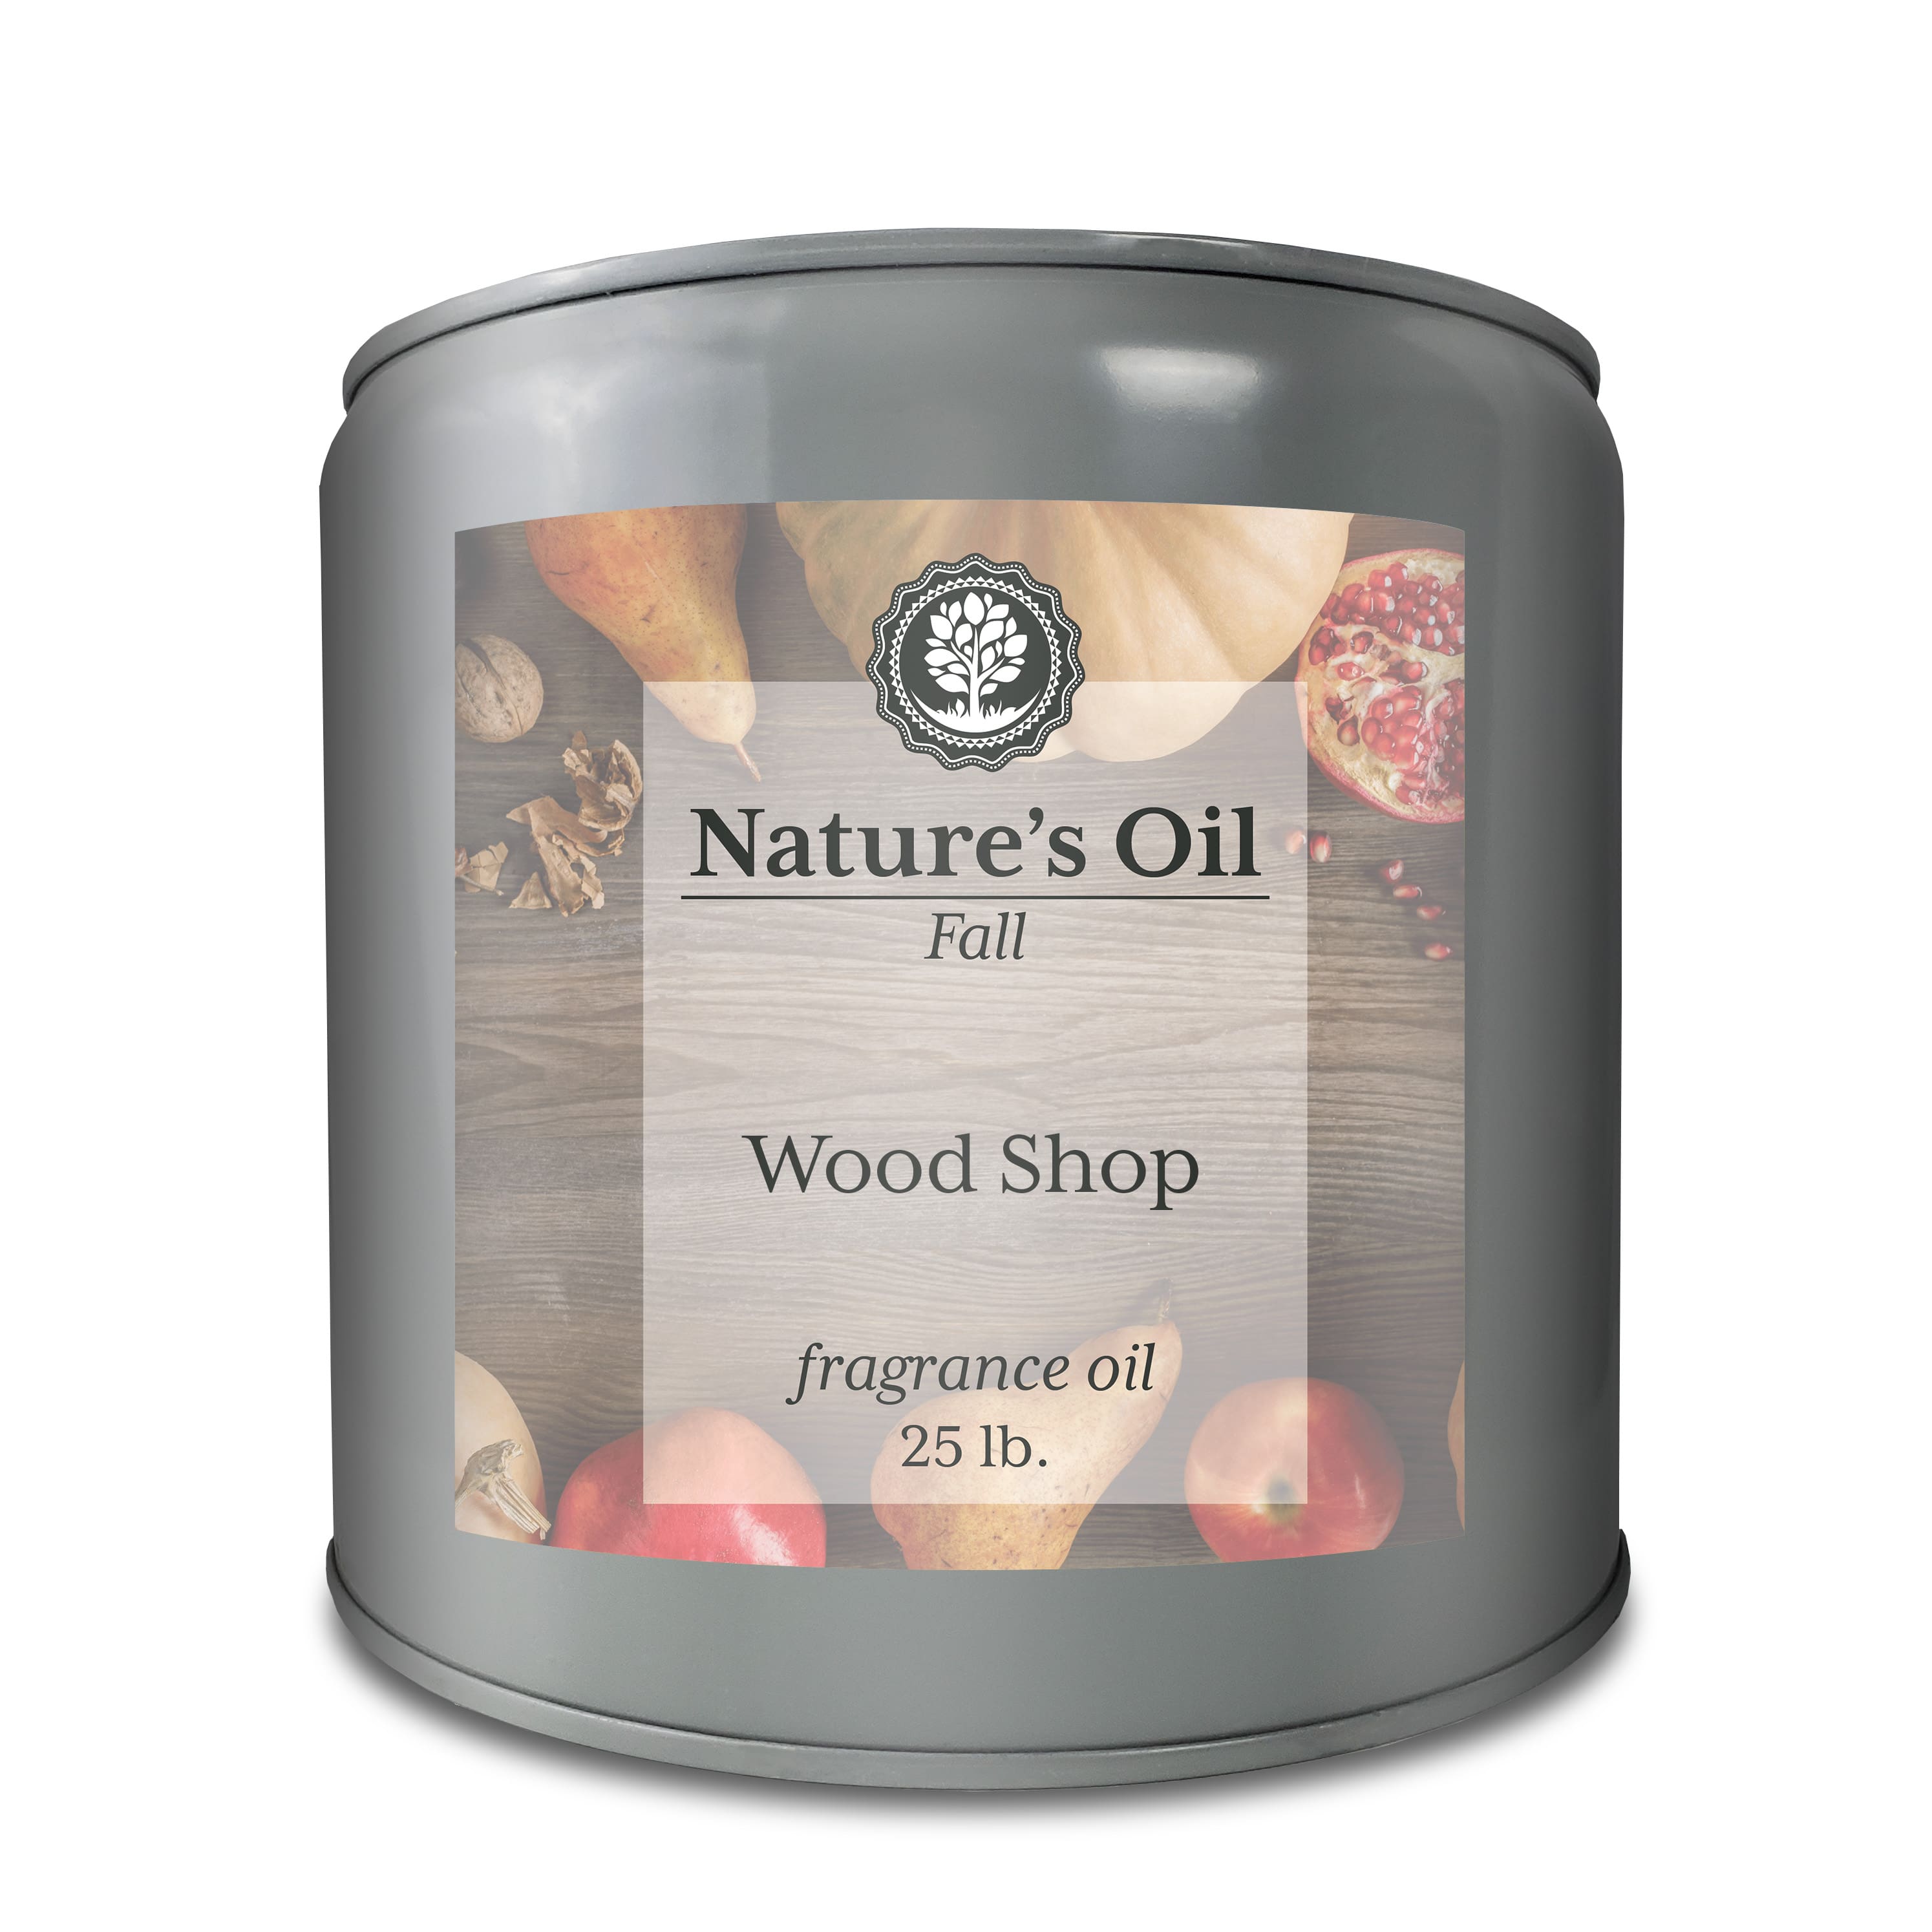 Nature's Oil Products - Nature's Oil